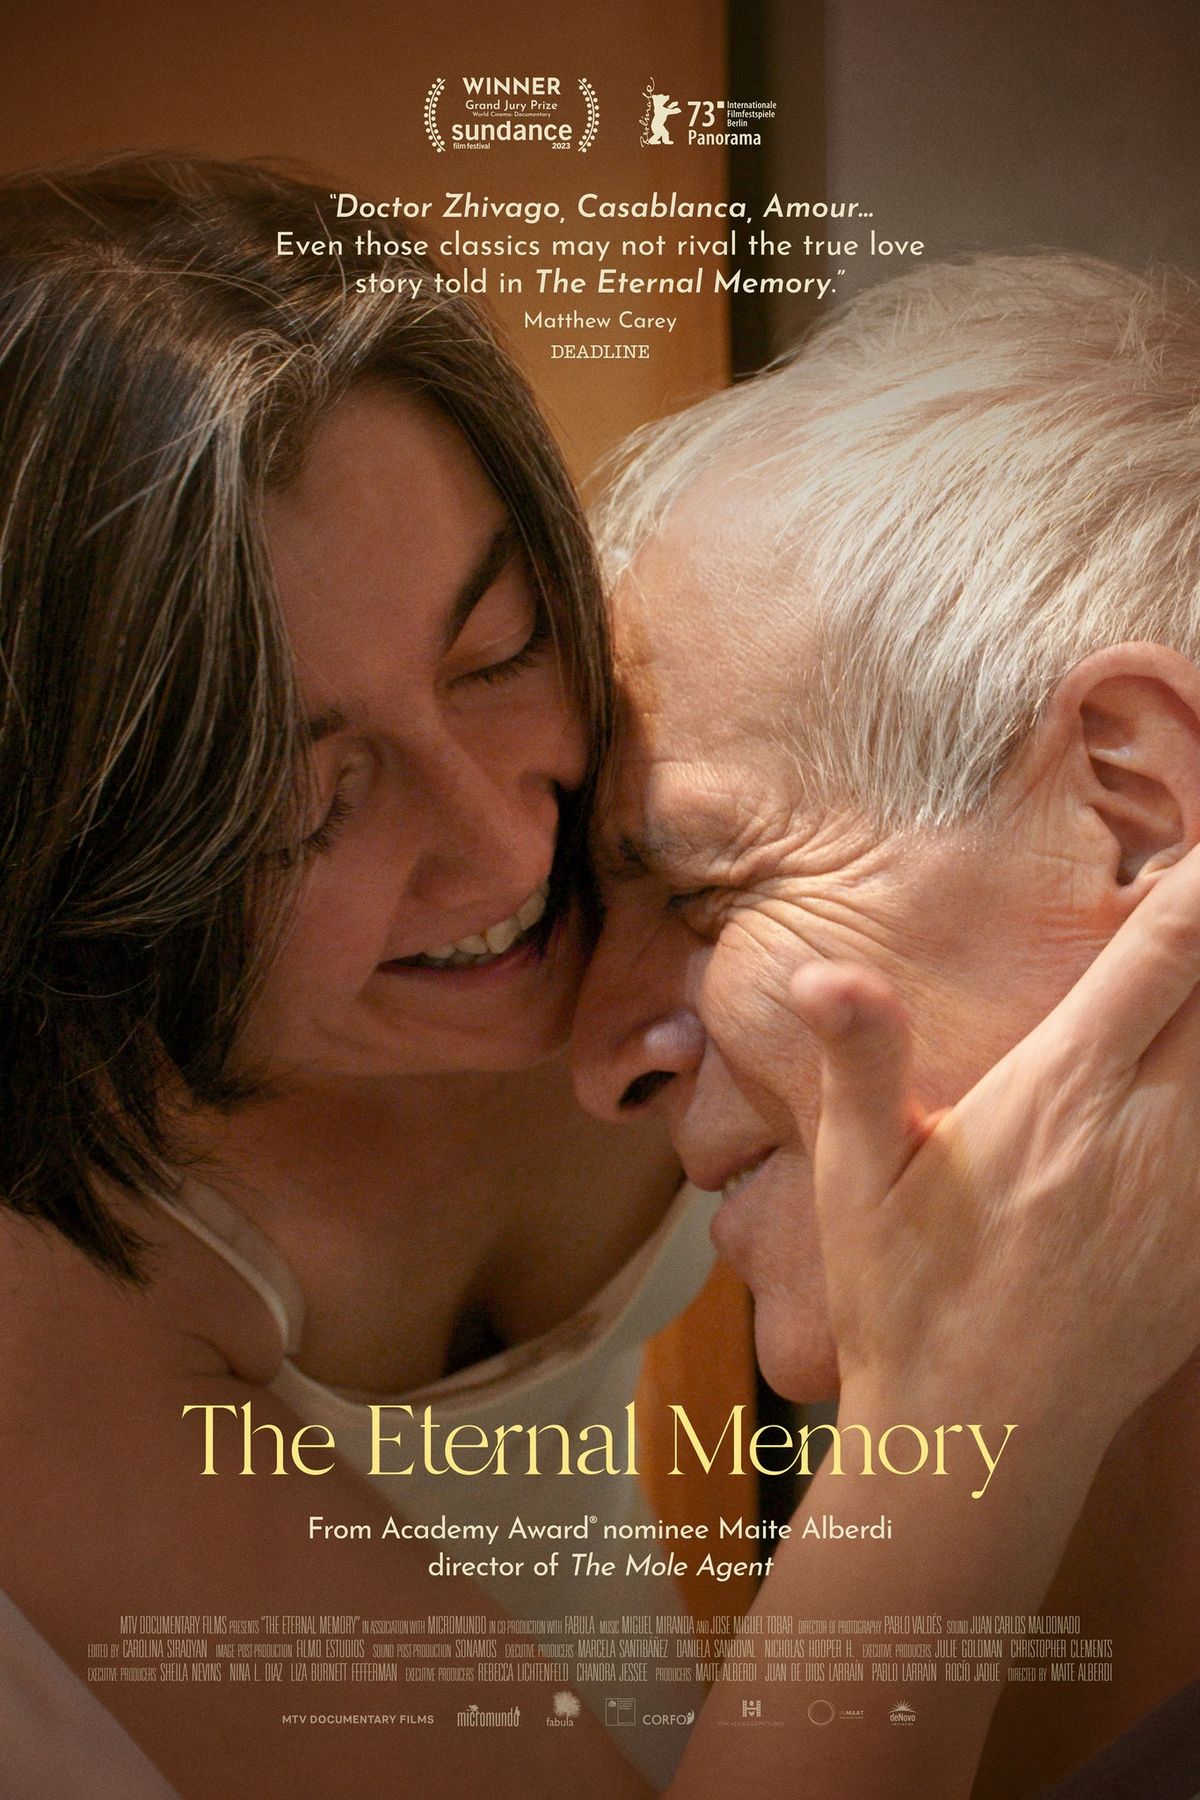 The Eternal Memory - Film & Panel Discussion